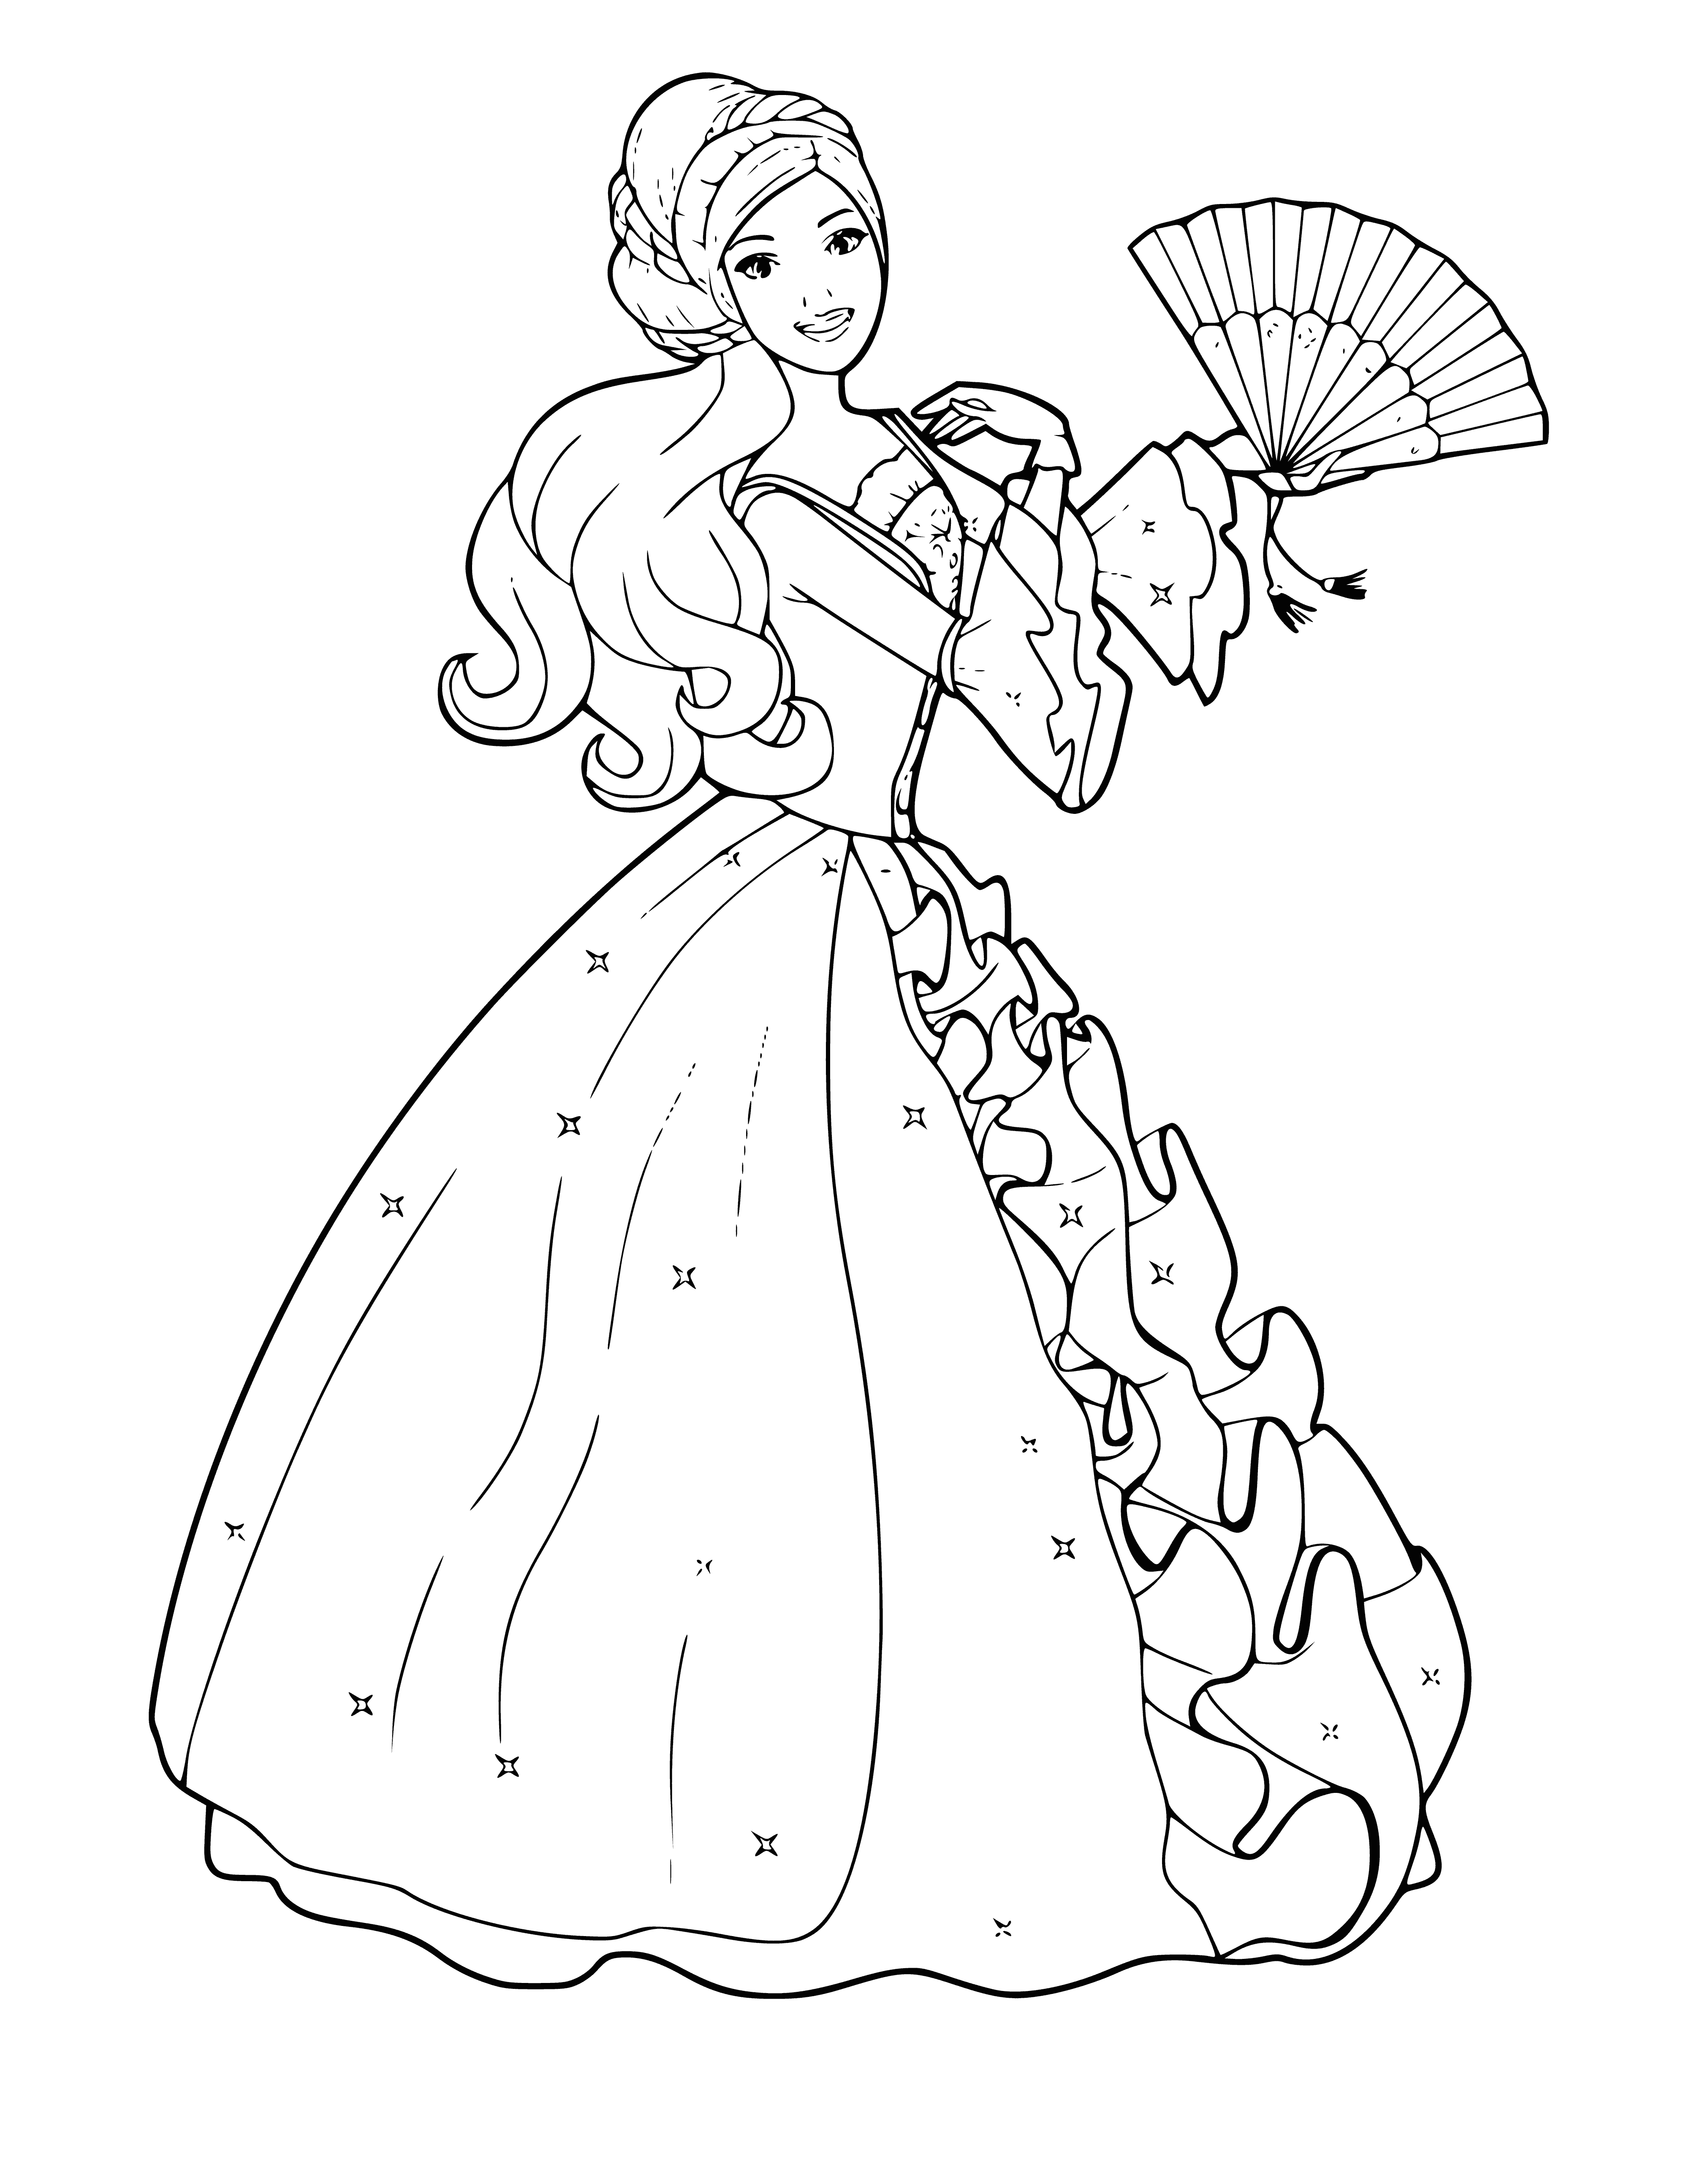 coloring page: Barbie holds pink fan, wearing pink strapless dress, blonde hair in ponytail, hand on hip.